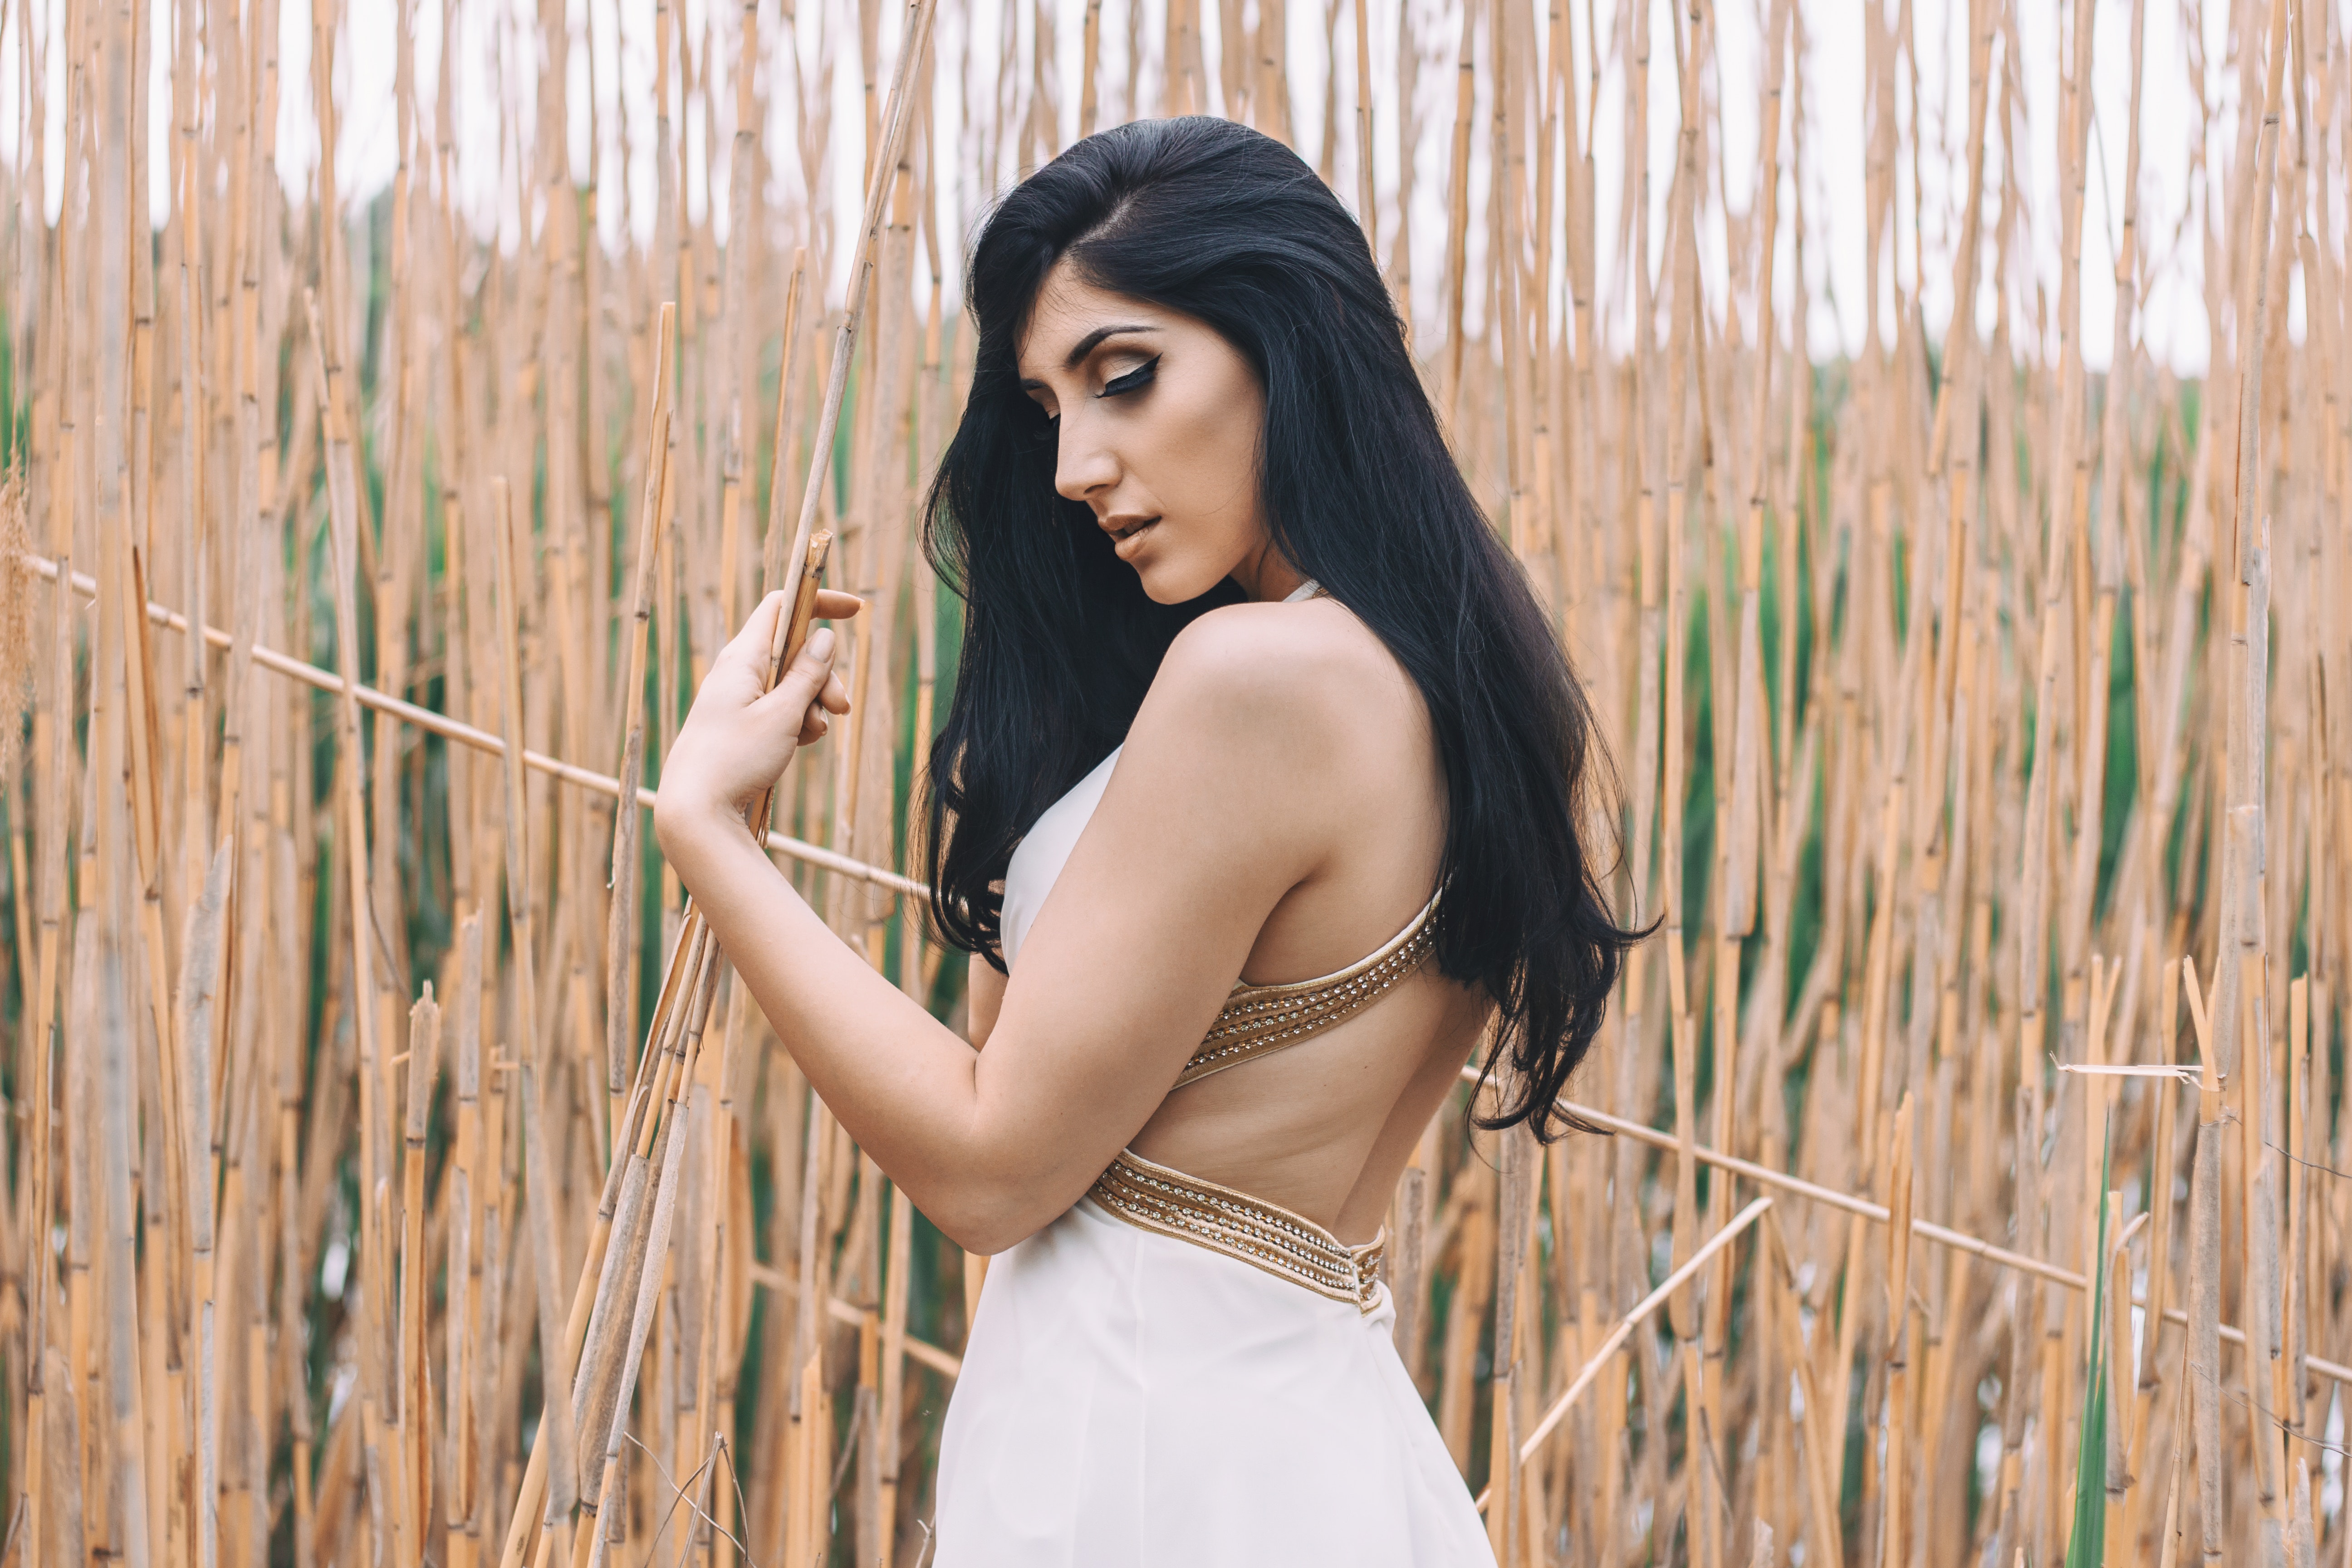 Woman in White Backless Dress in Front of Bamboo Sticks, Model, Young, Woman, Wear, HQ Photo